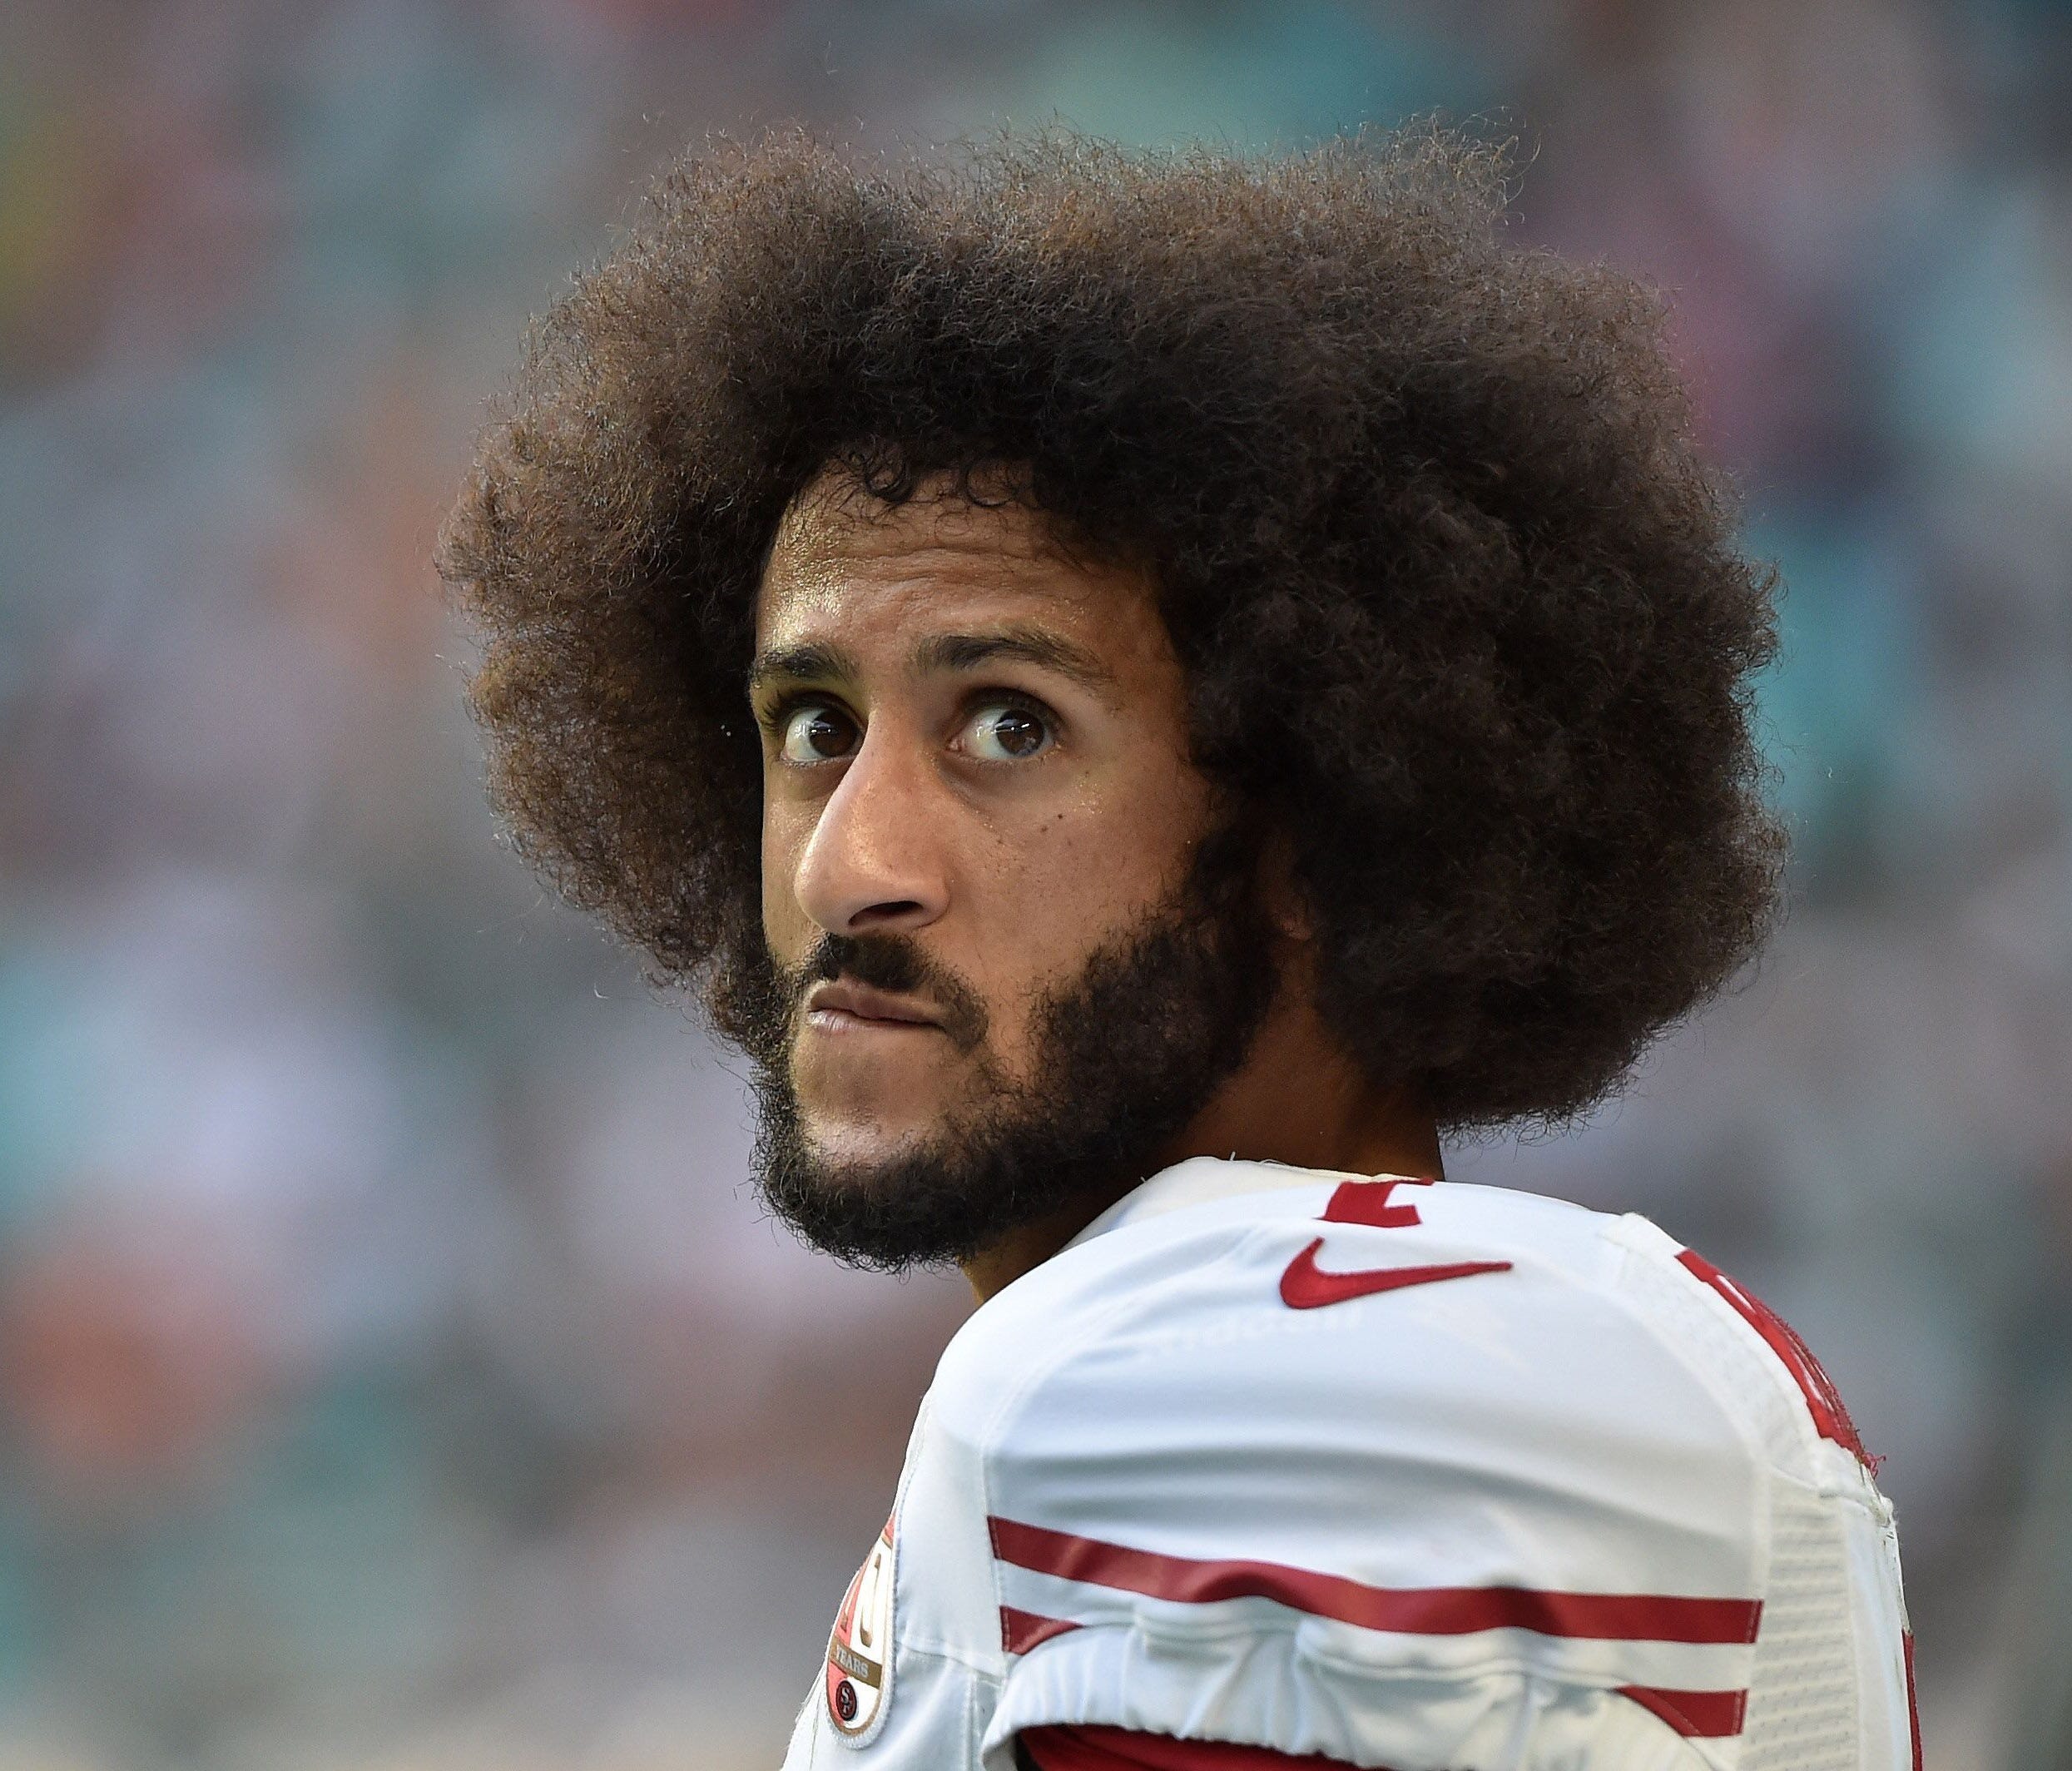 Colin Kaepernick threw for 16 touchdowns and four interceptions in 12 games last season for the San Francisco 49ers.